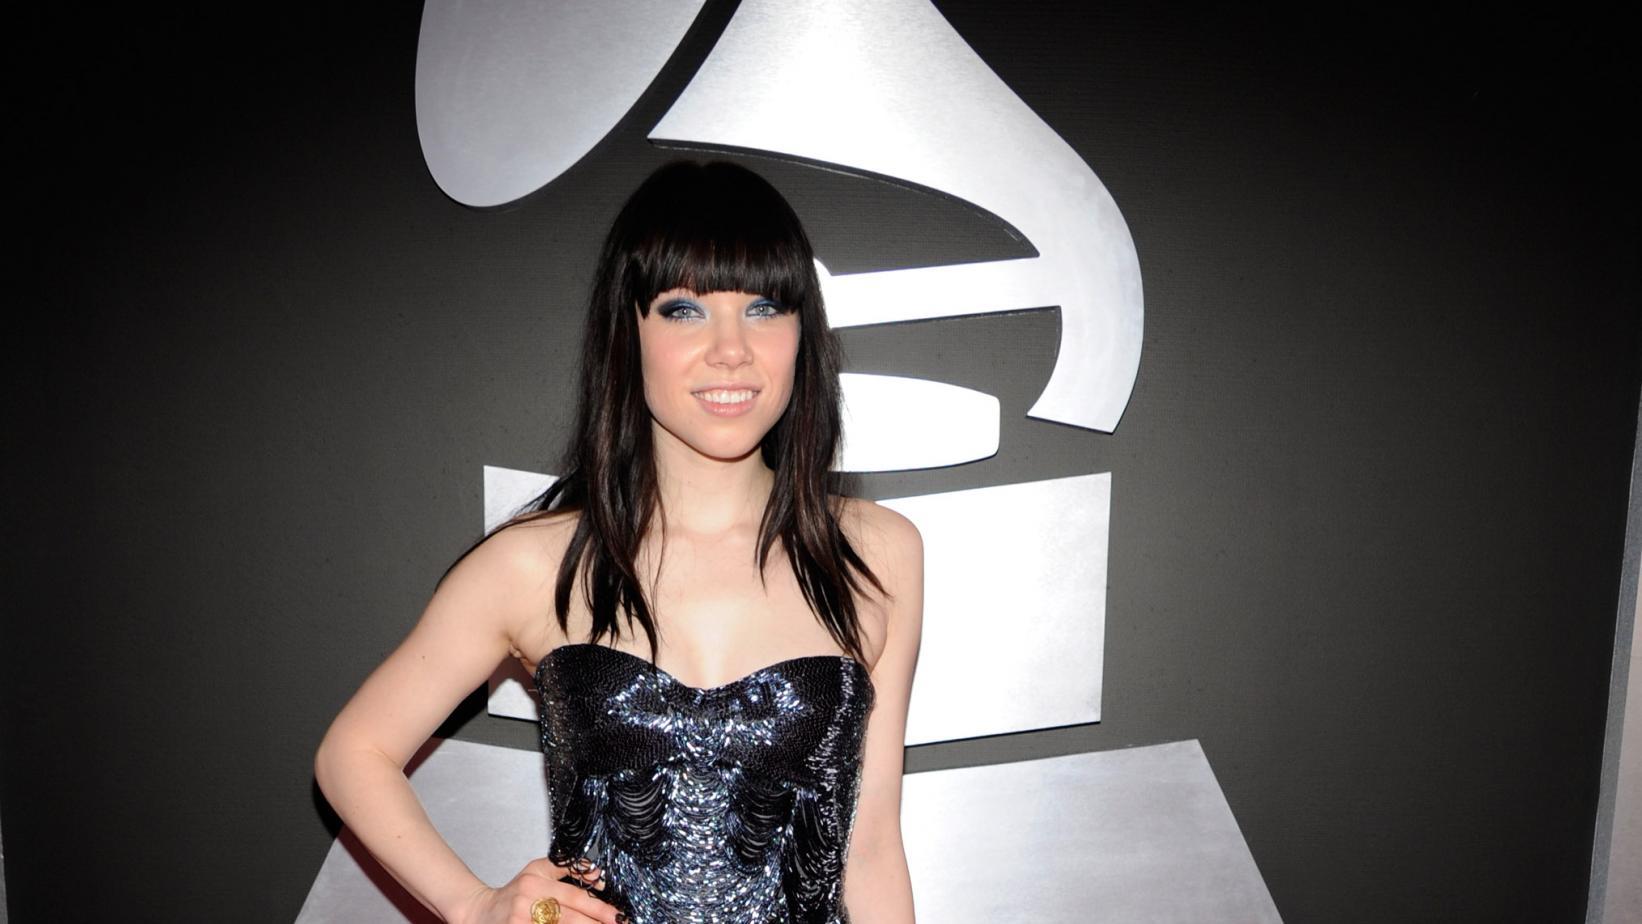 Exclusive GRAMMY.com Interview With Carly Rae Jepsen